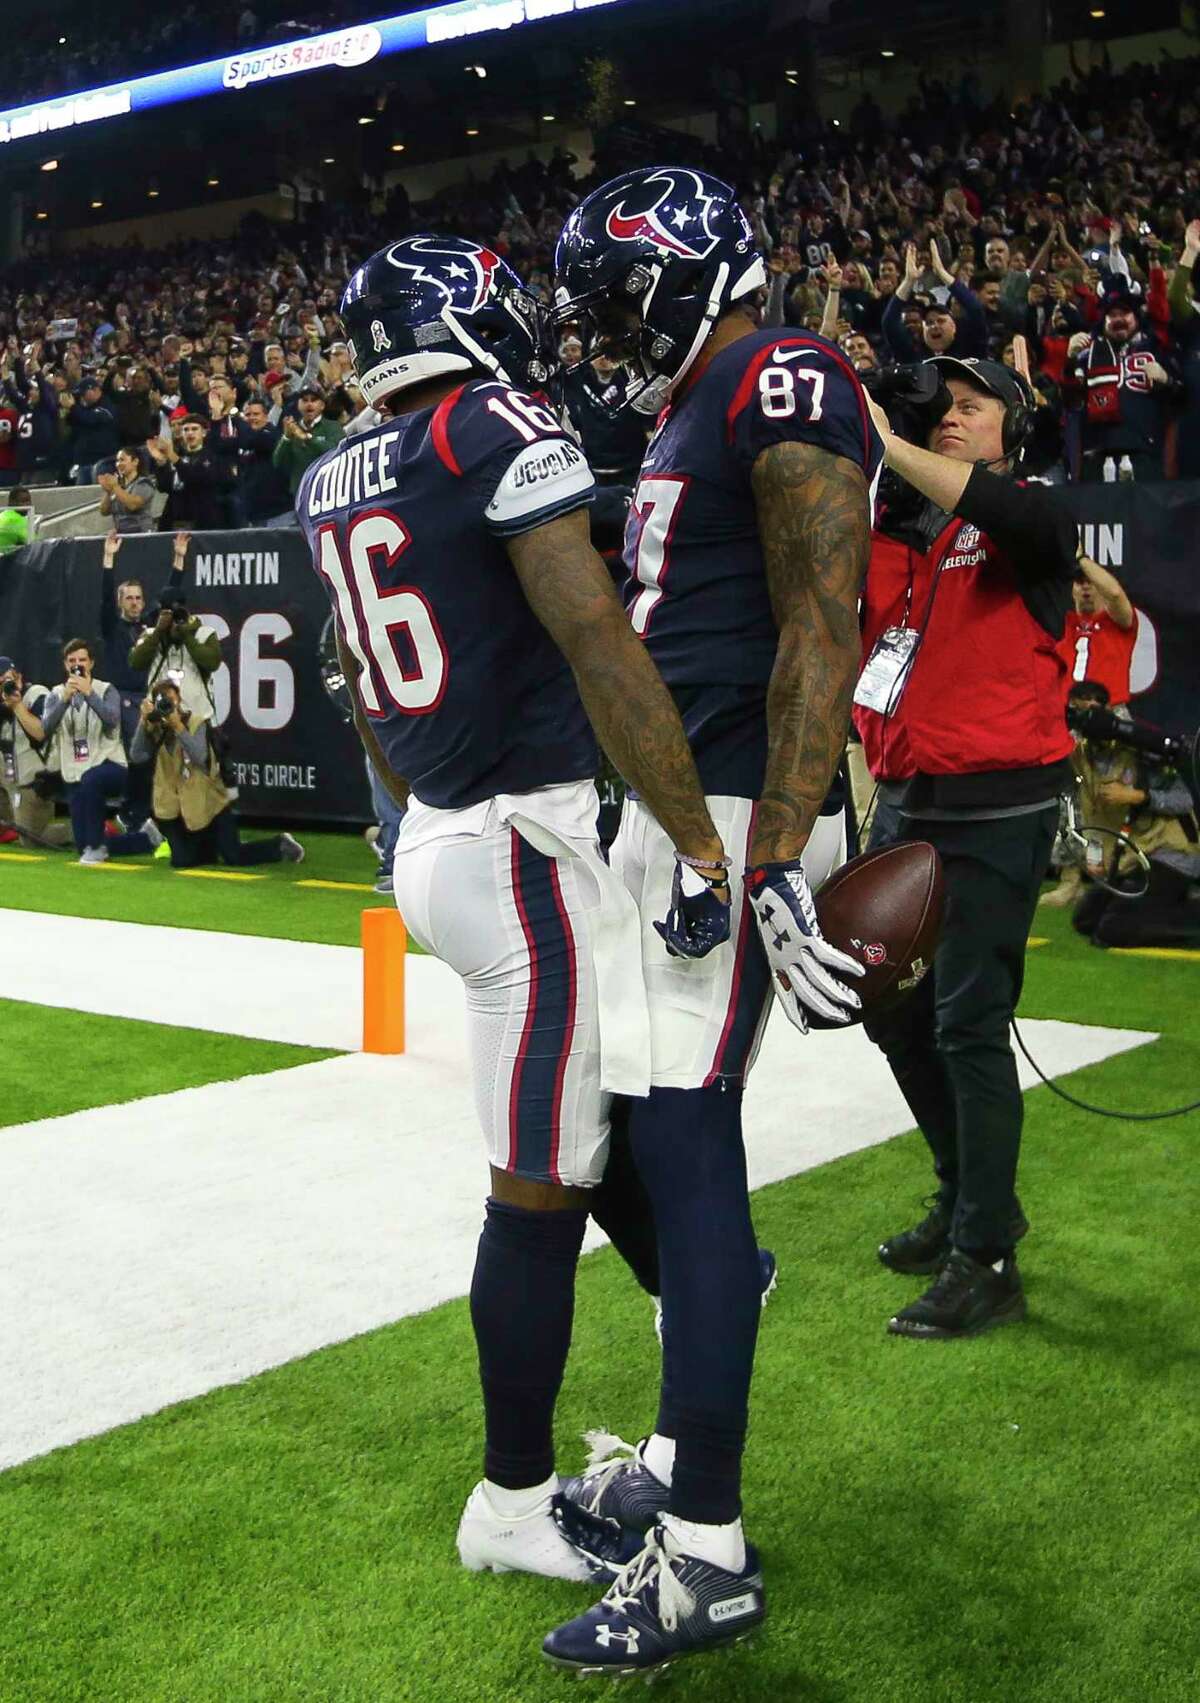 Houston Texans wide receiver Demaryius Thomas (87) and wide receiver Keke Coutee (16) celebrate a touchdown by Thomas during the first quarter of an NFL football game at NRG Stadium, Monday, Nov. 26, 2018, in Houston.